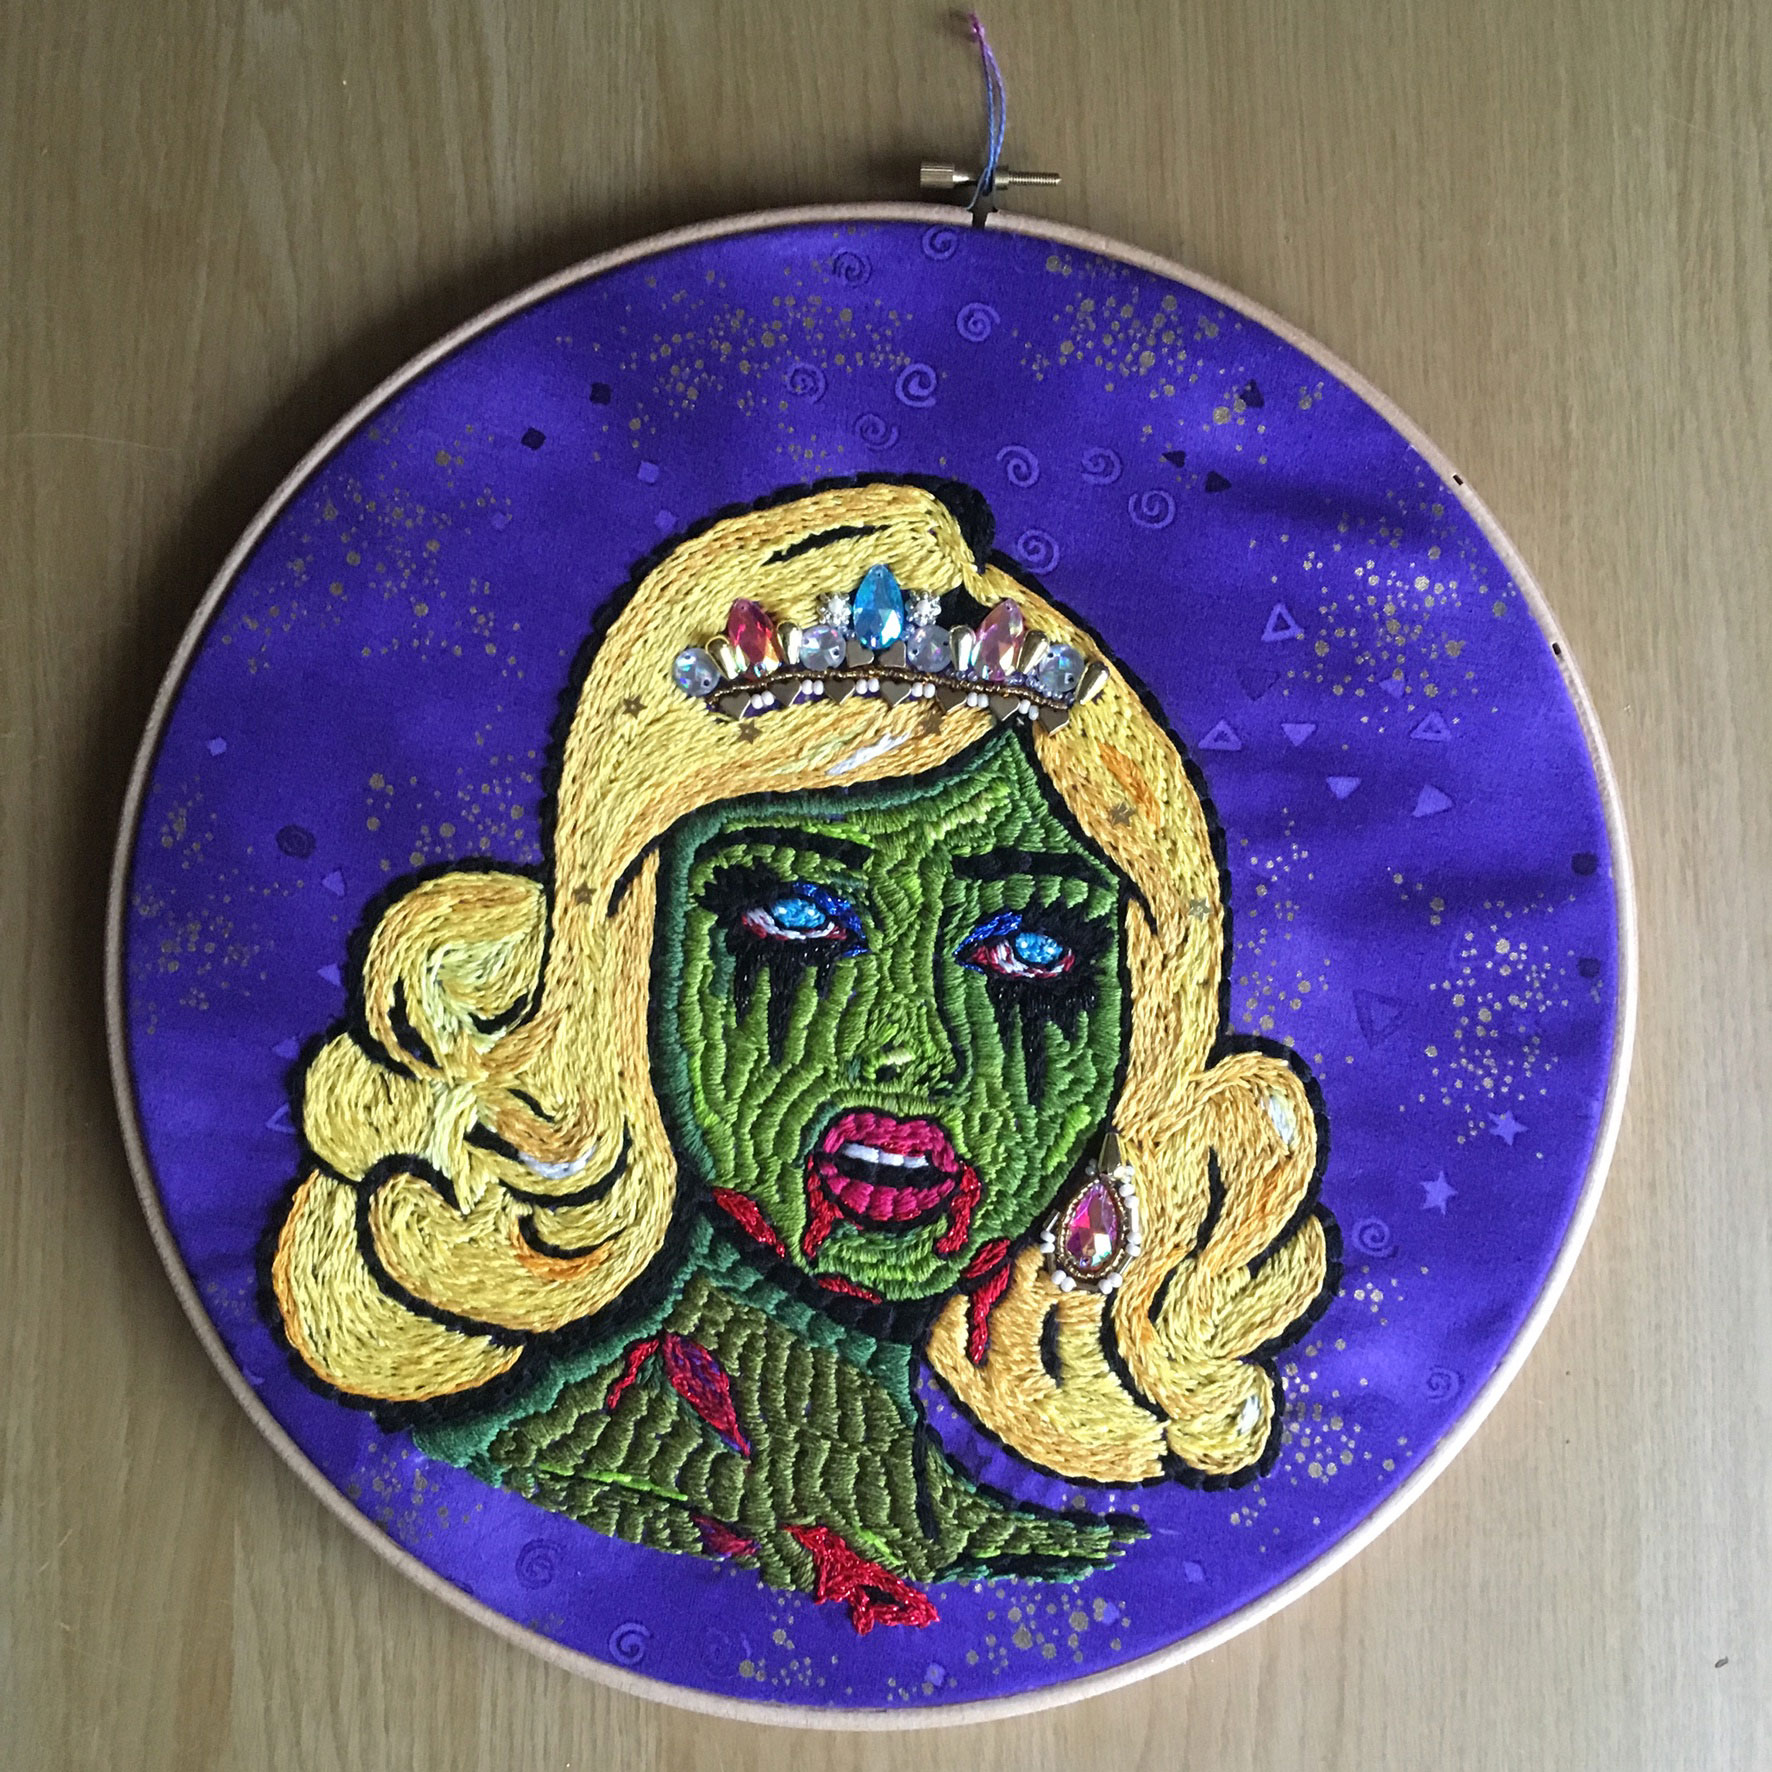 Embroidery hoop art by Sarah Mannix